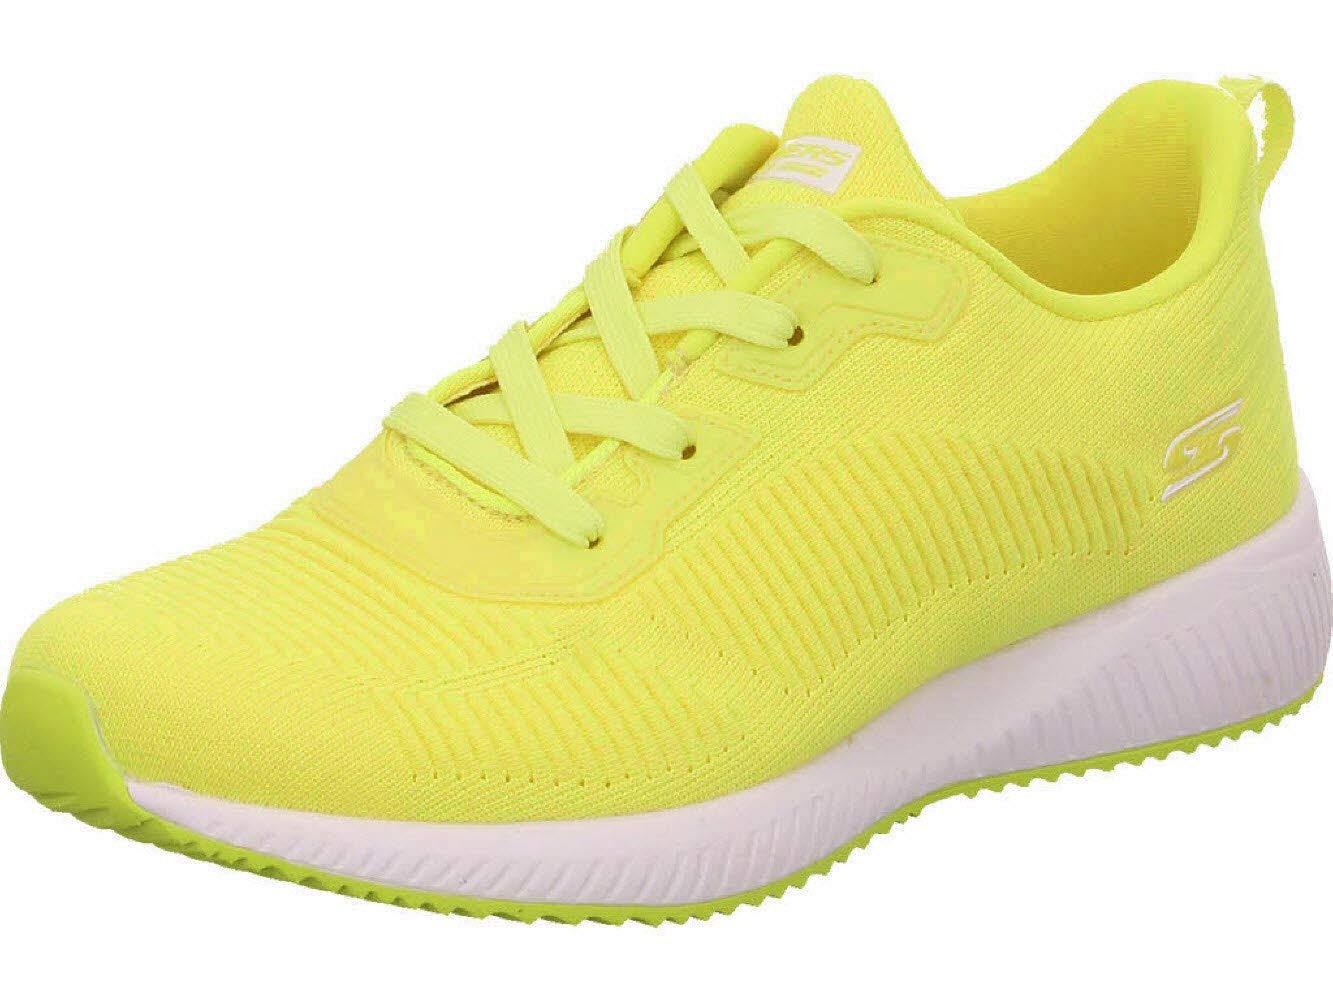 Skechers Bobs Bobs Squad-glow Rider Sneaker in Neon Yellow (Yellow ...